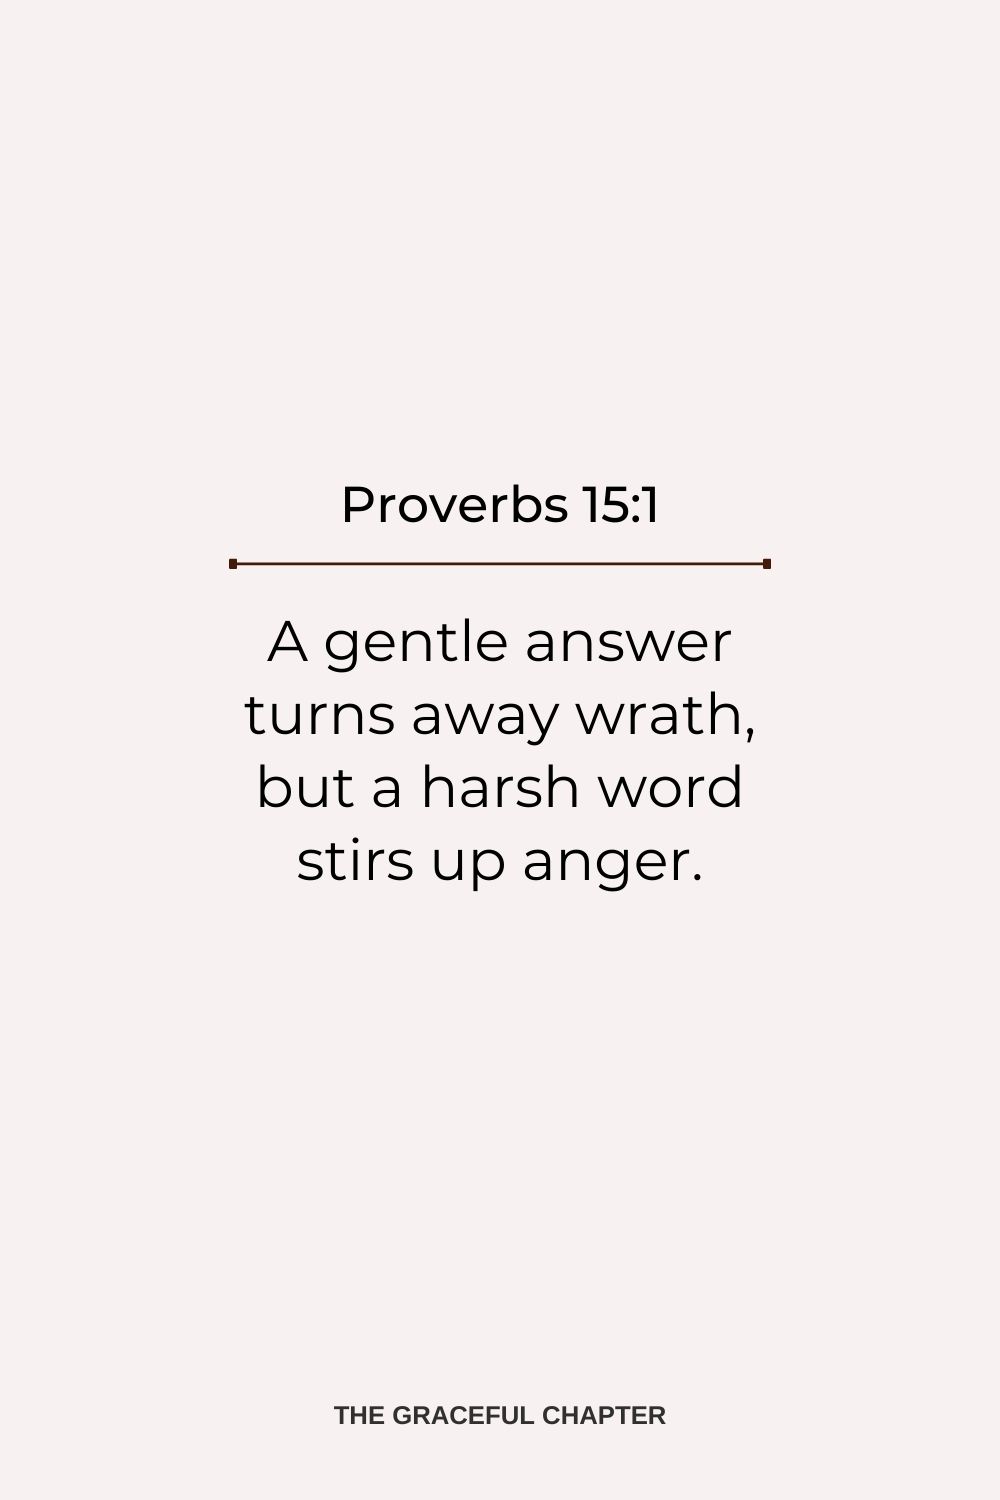 A gentle answer turns away wrath, but a harsh word stirs up anger. Proverbs 15:1